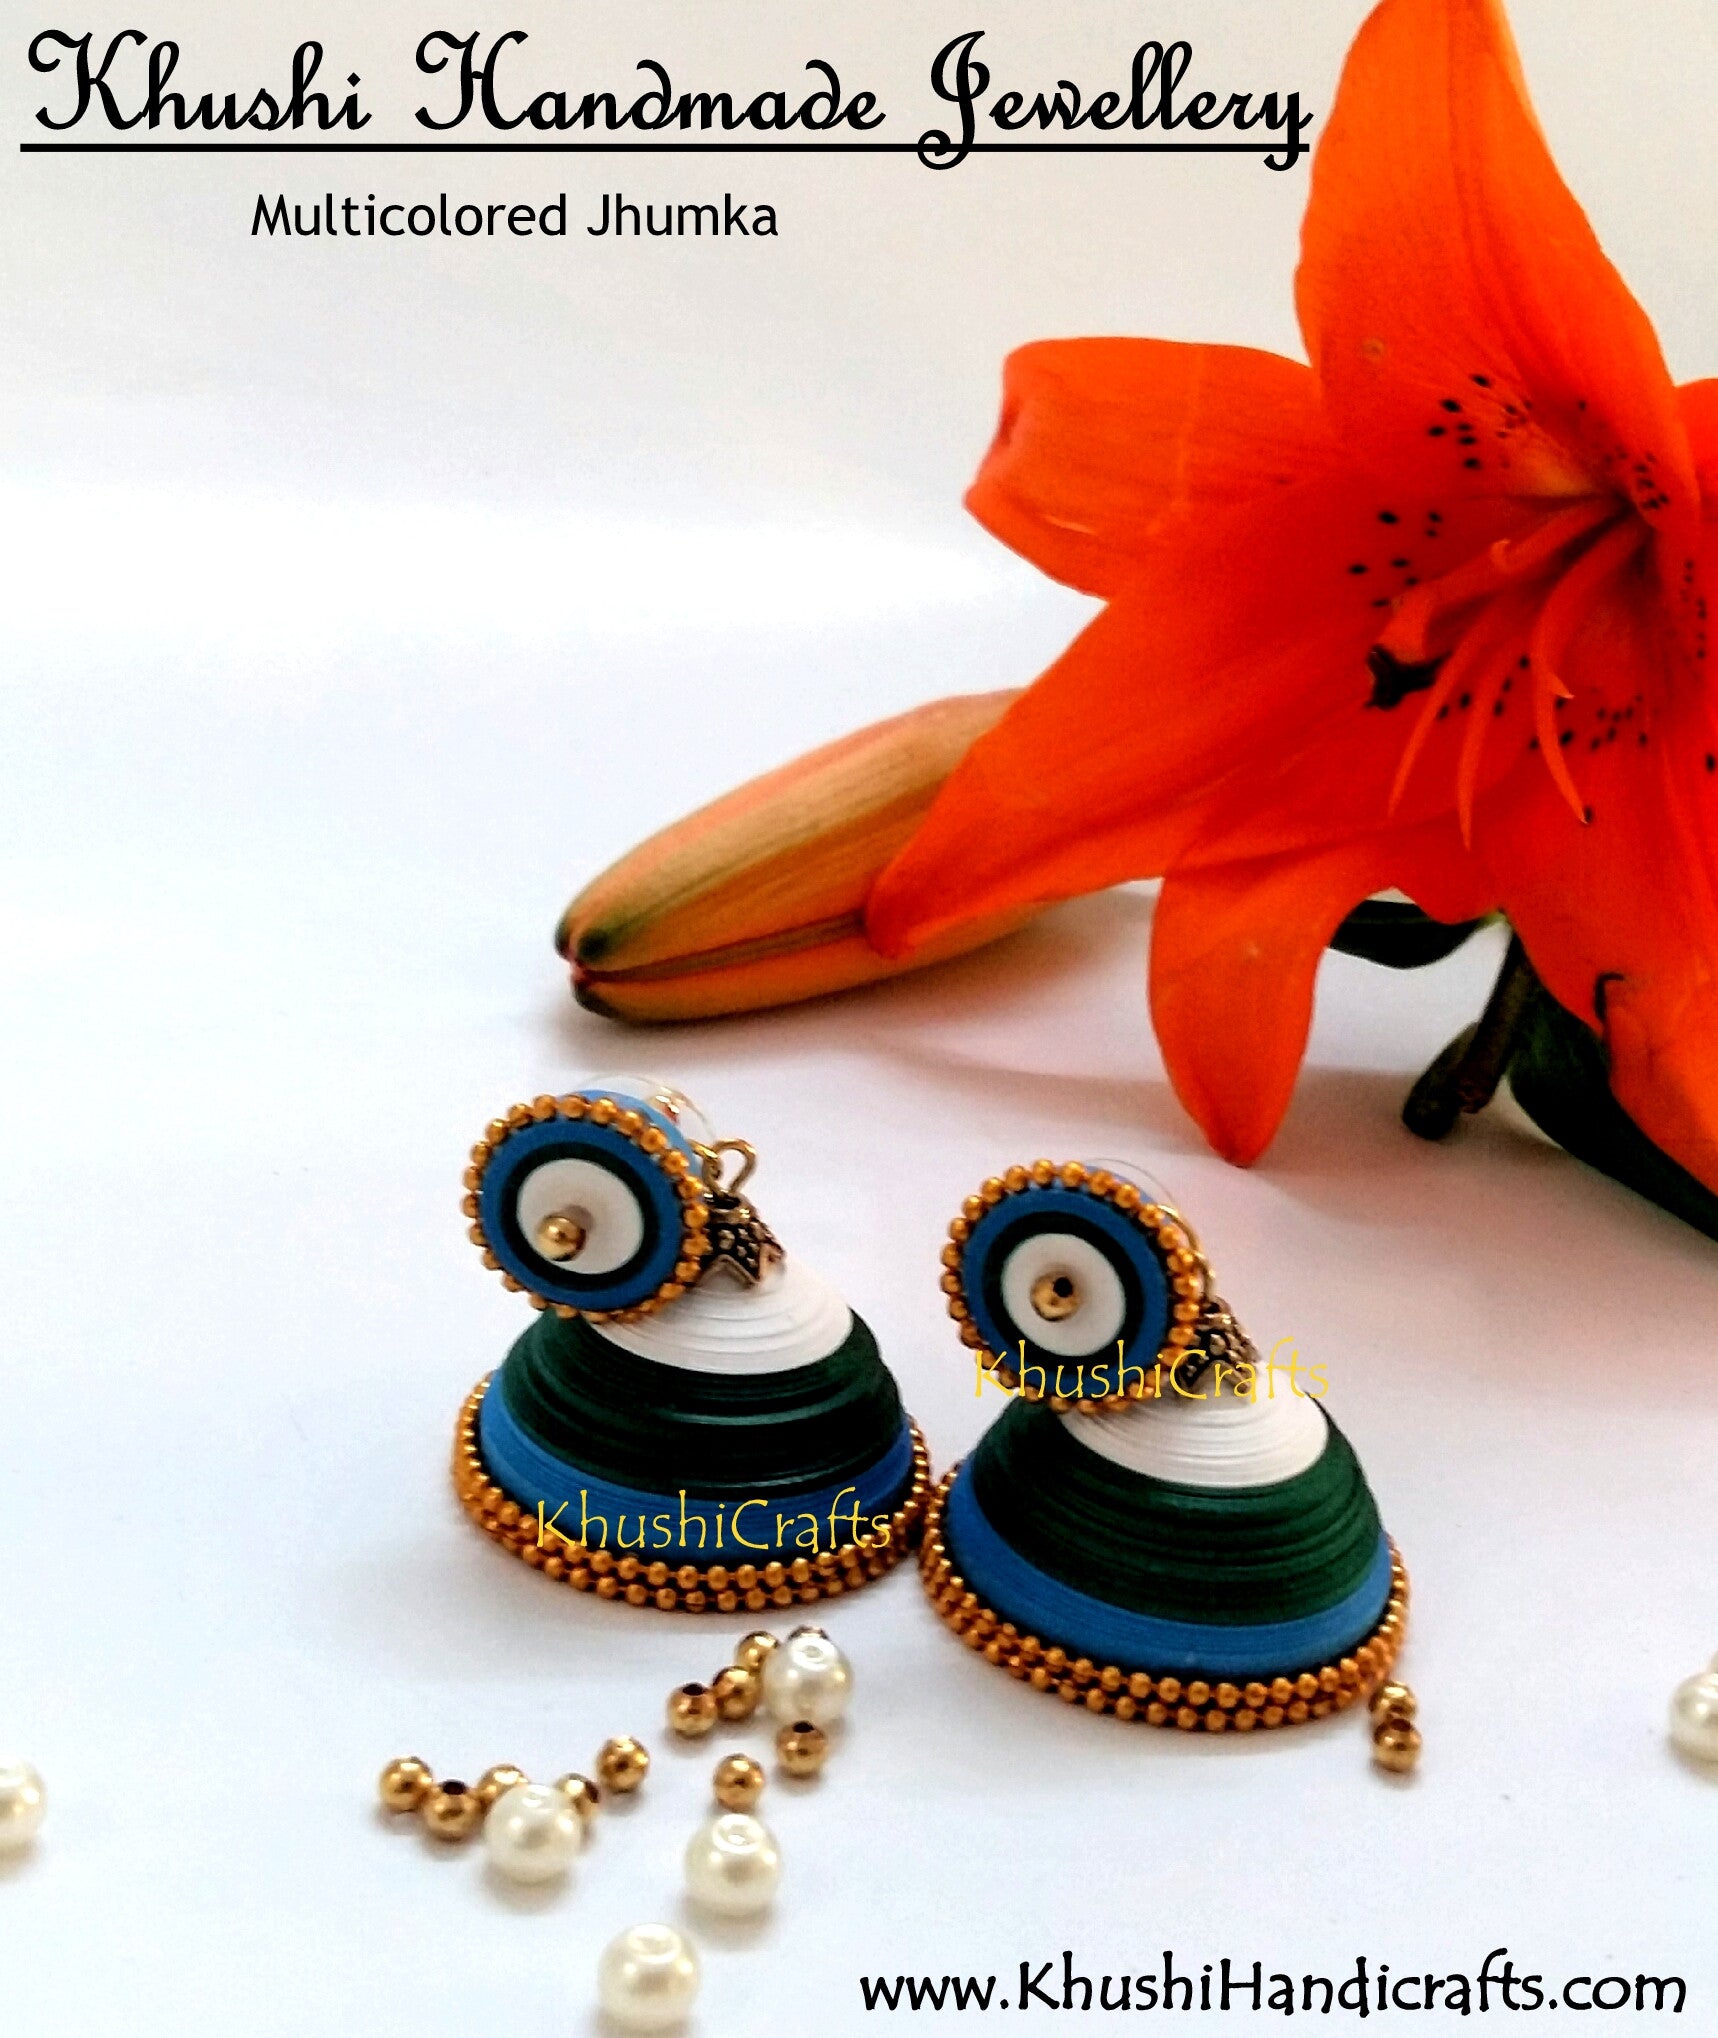 Quilled jhumka Earrings